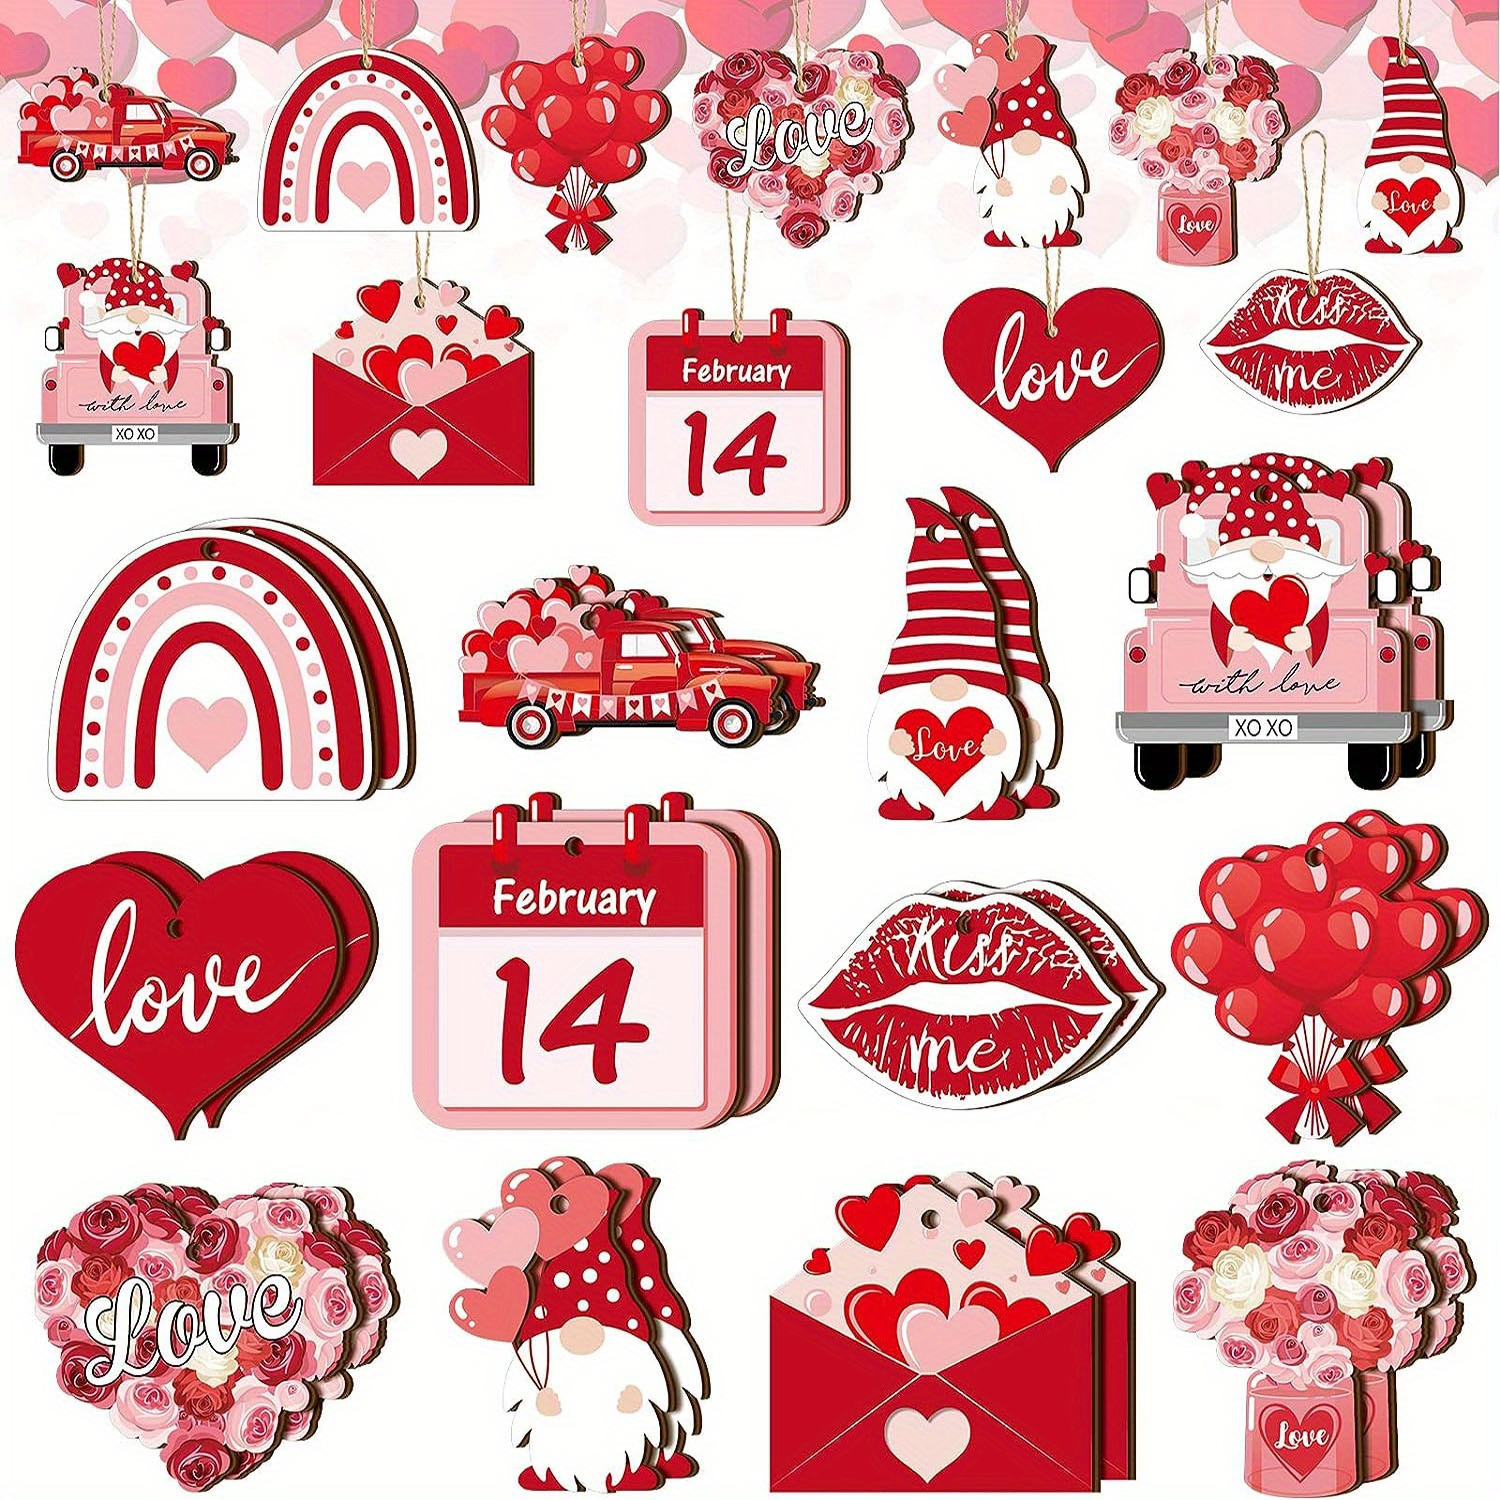 Heart Ornaments Valentines Day Decor Indoor for Valentine Tree Decorations Hanging 36 Pcs